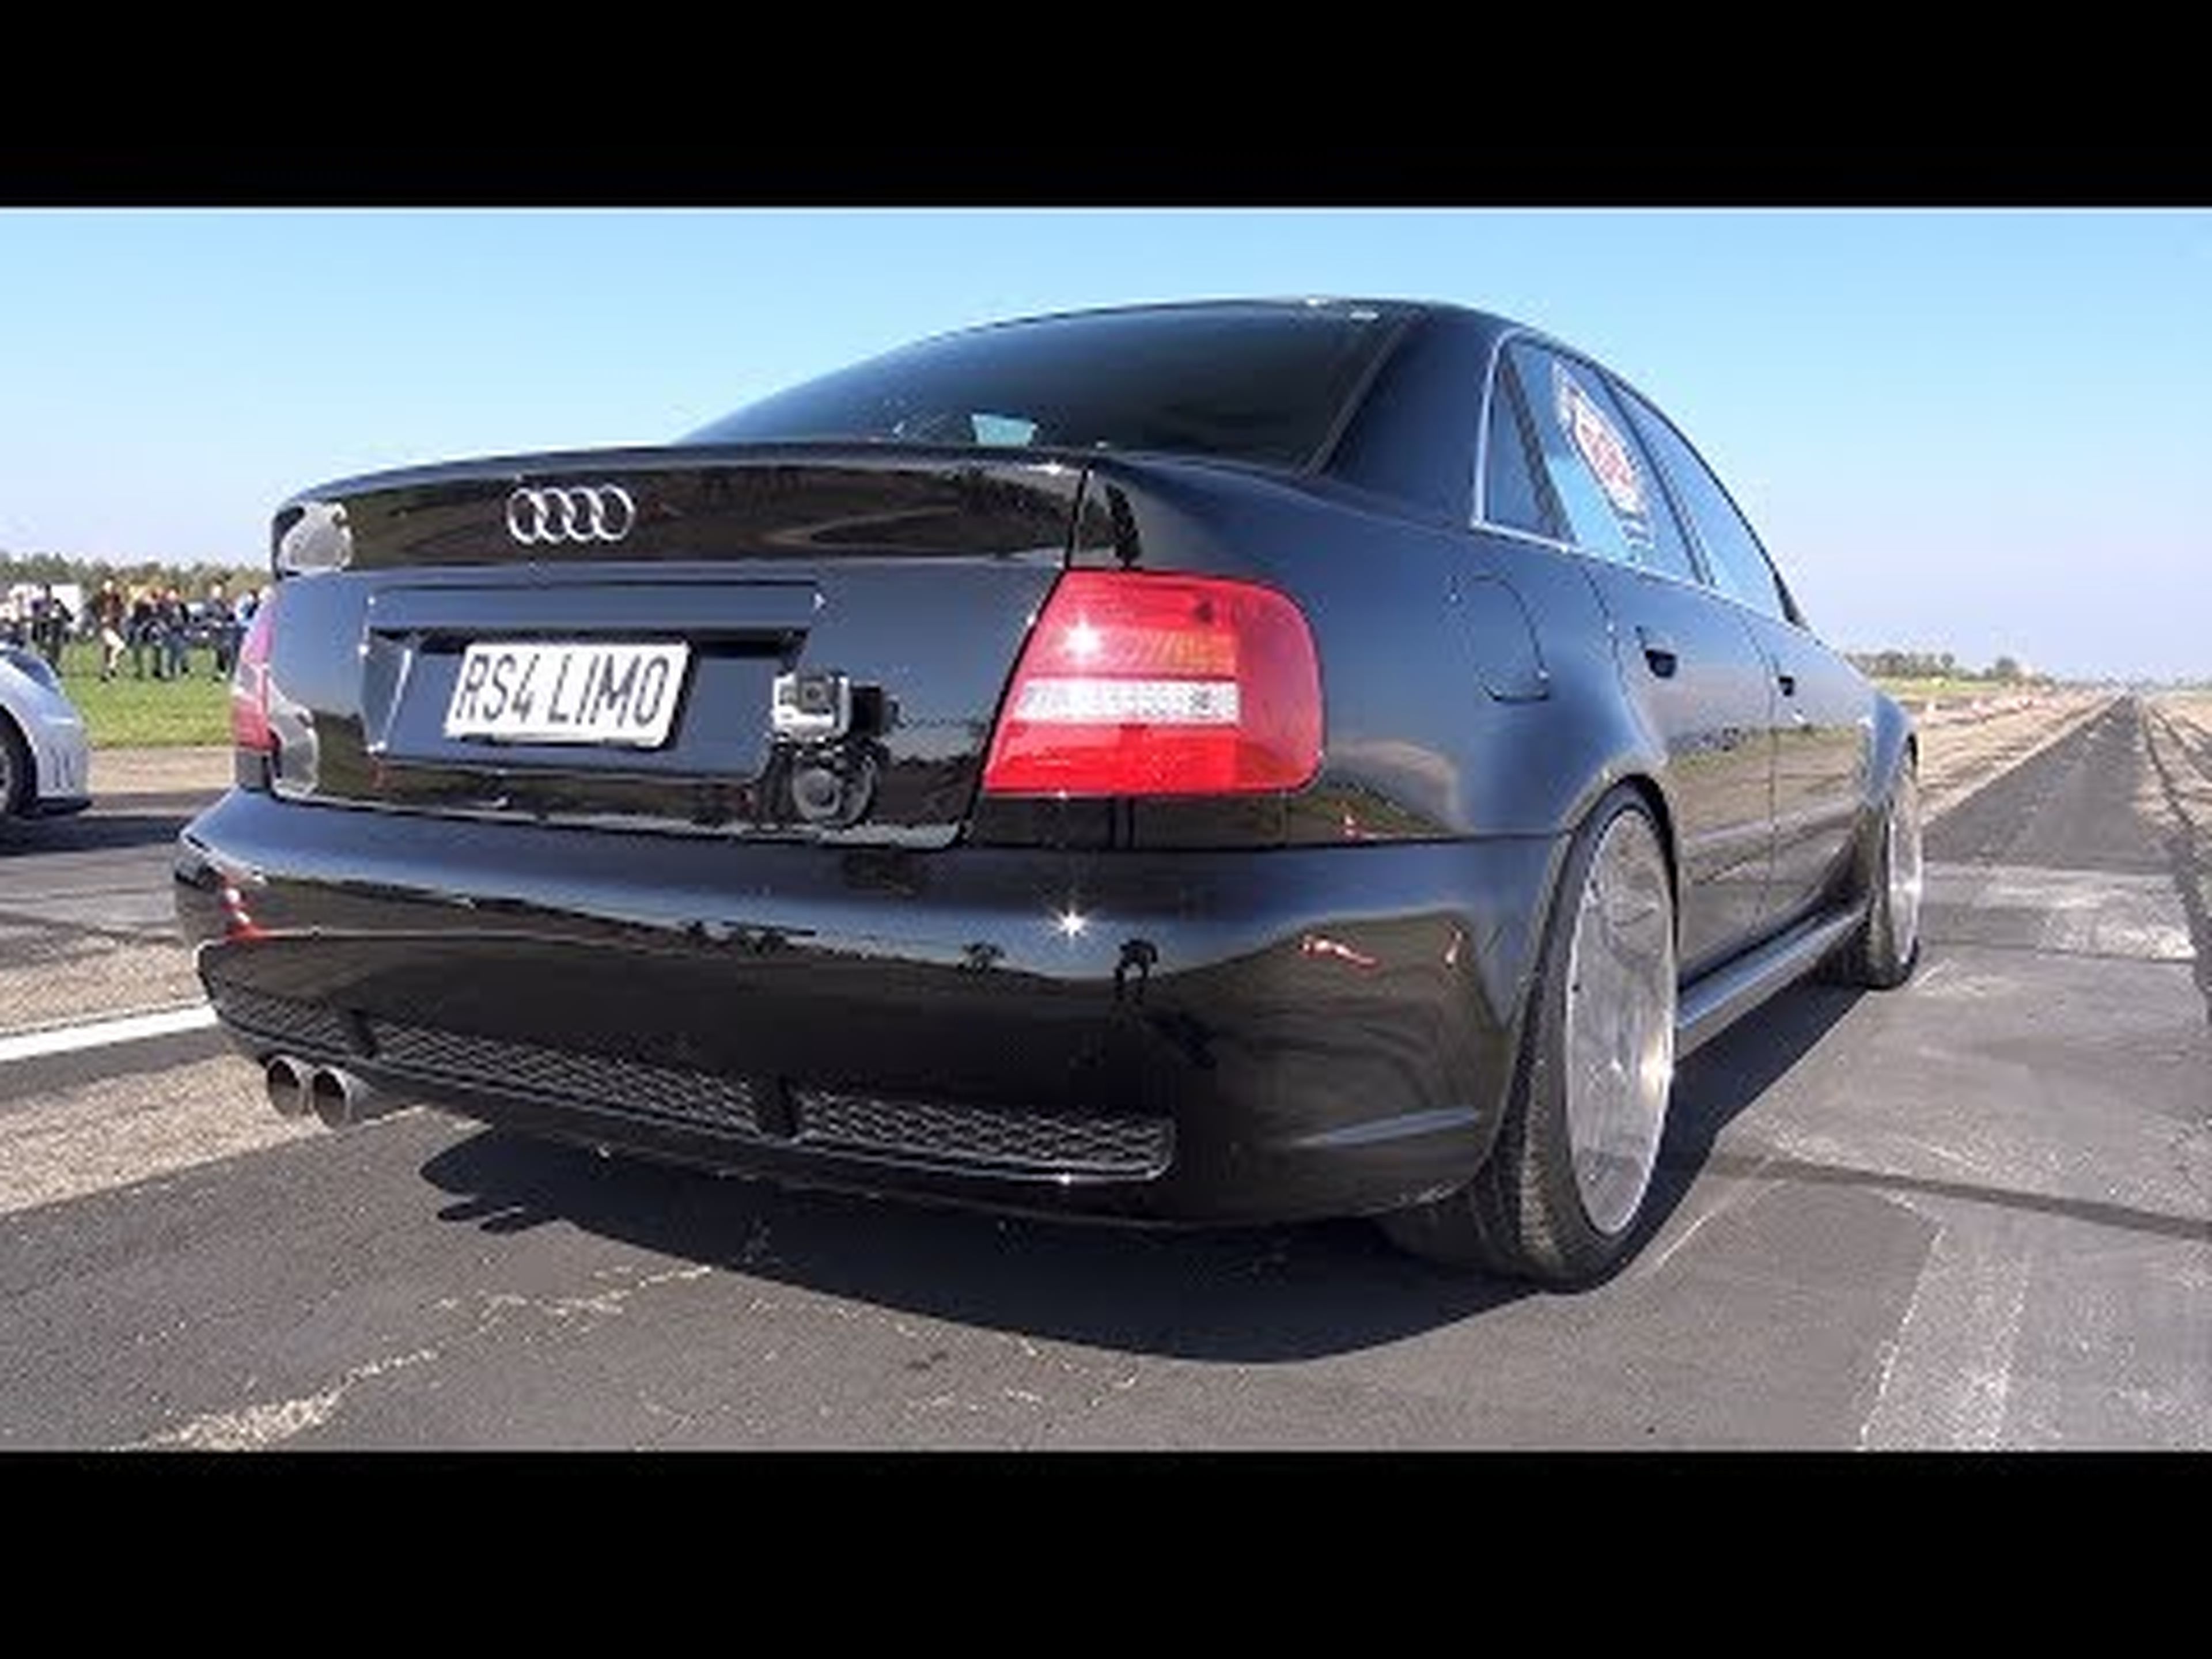 1100HP+ Audi (R)S4 Limo Hannover Hardcore - INSANE SOUNDS!